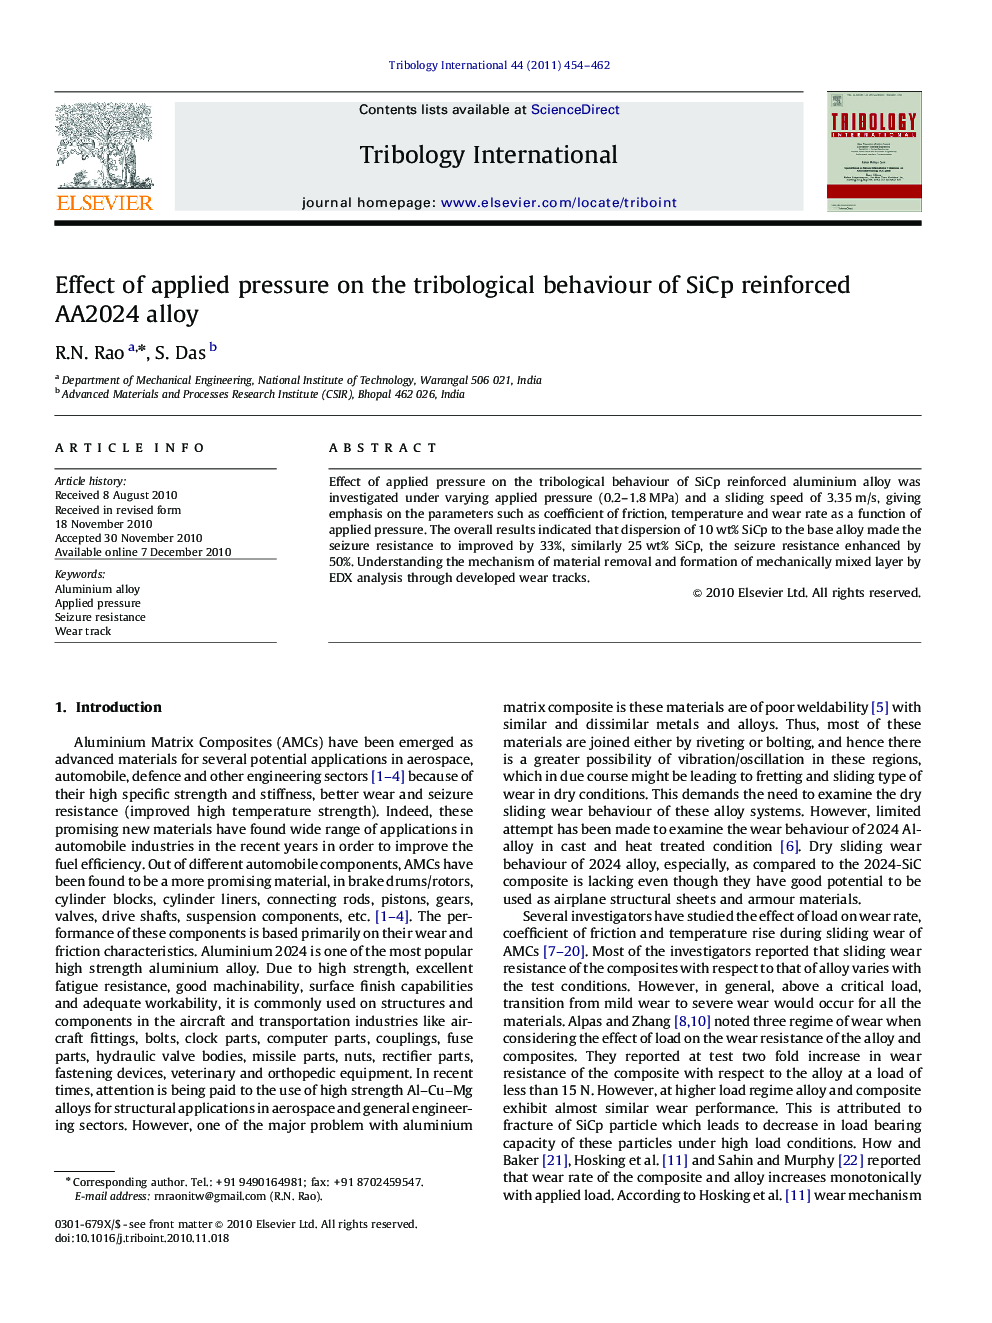 Effect of applied pressure on the tribological behaviour of SiCp reinforced AA2024 alloy